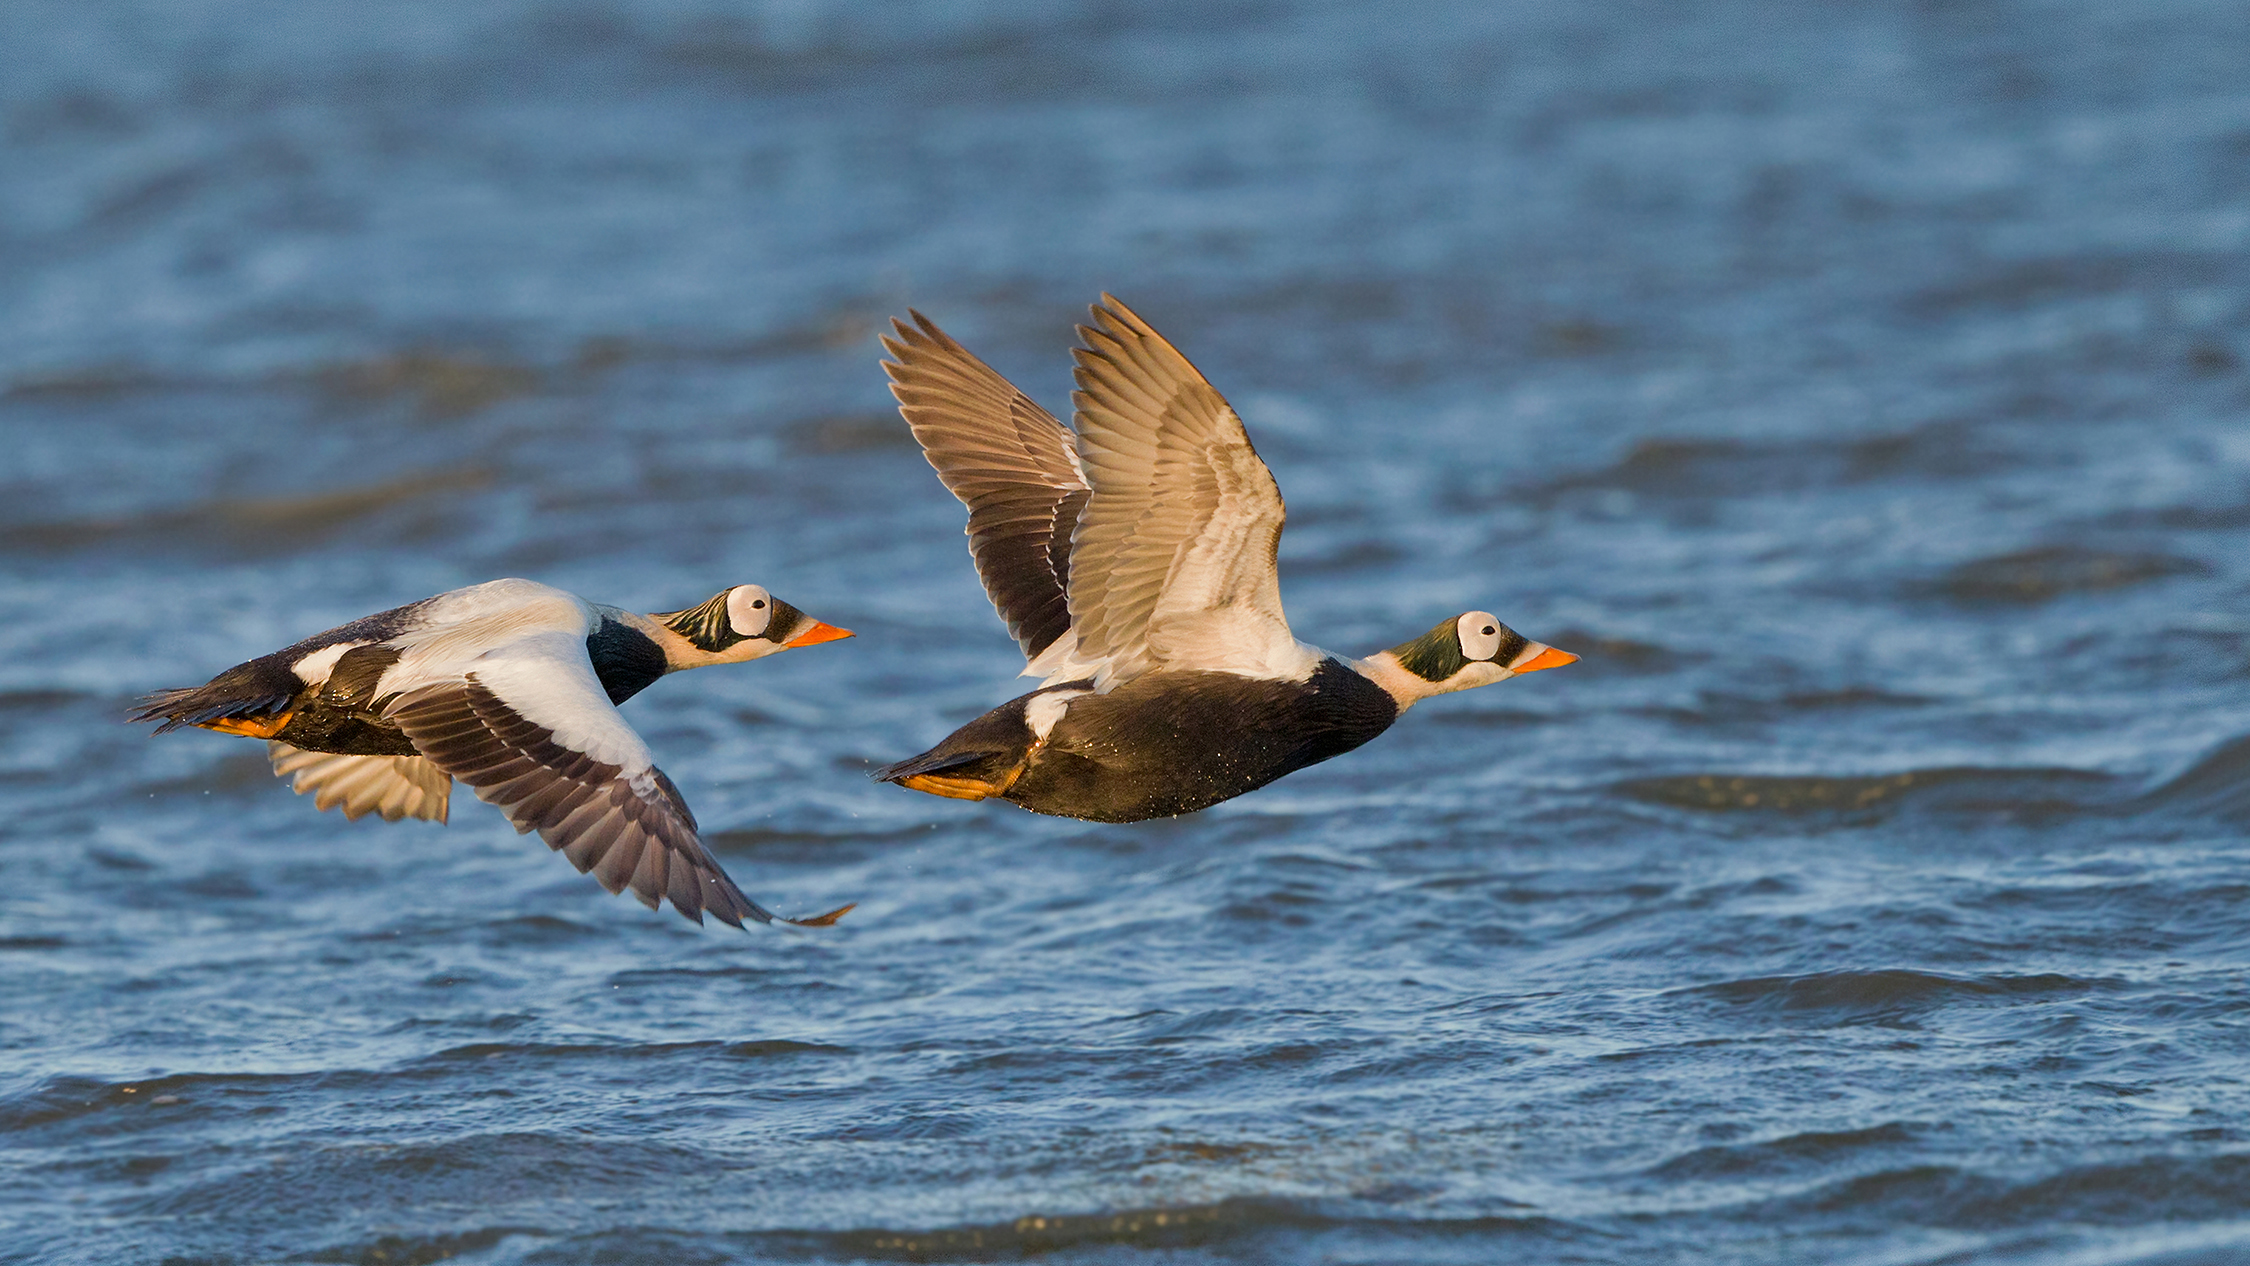 A pair of spectacled eider drakes fly over the coastal waters of Barrow, Alaska. Millions of seabirds migrate across long stretches of the Arctic Ocean each year, using marine habitat to feed, rest, and breed.